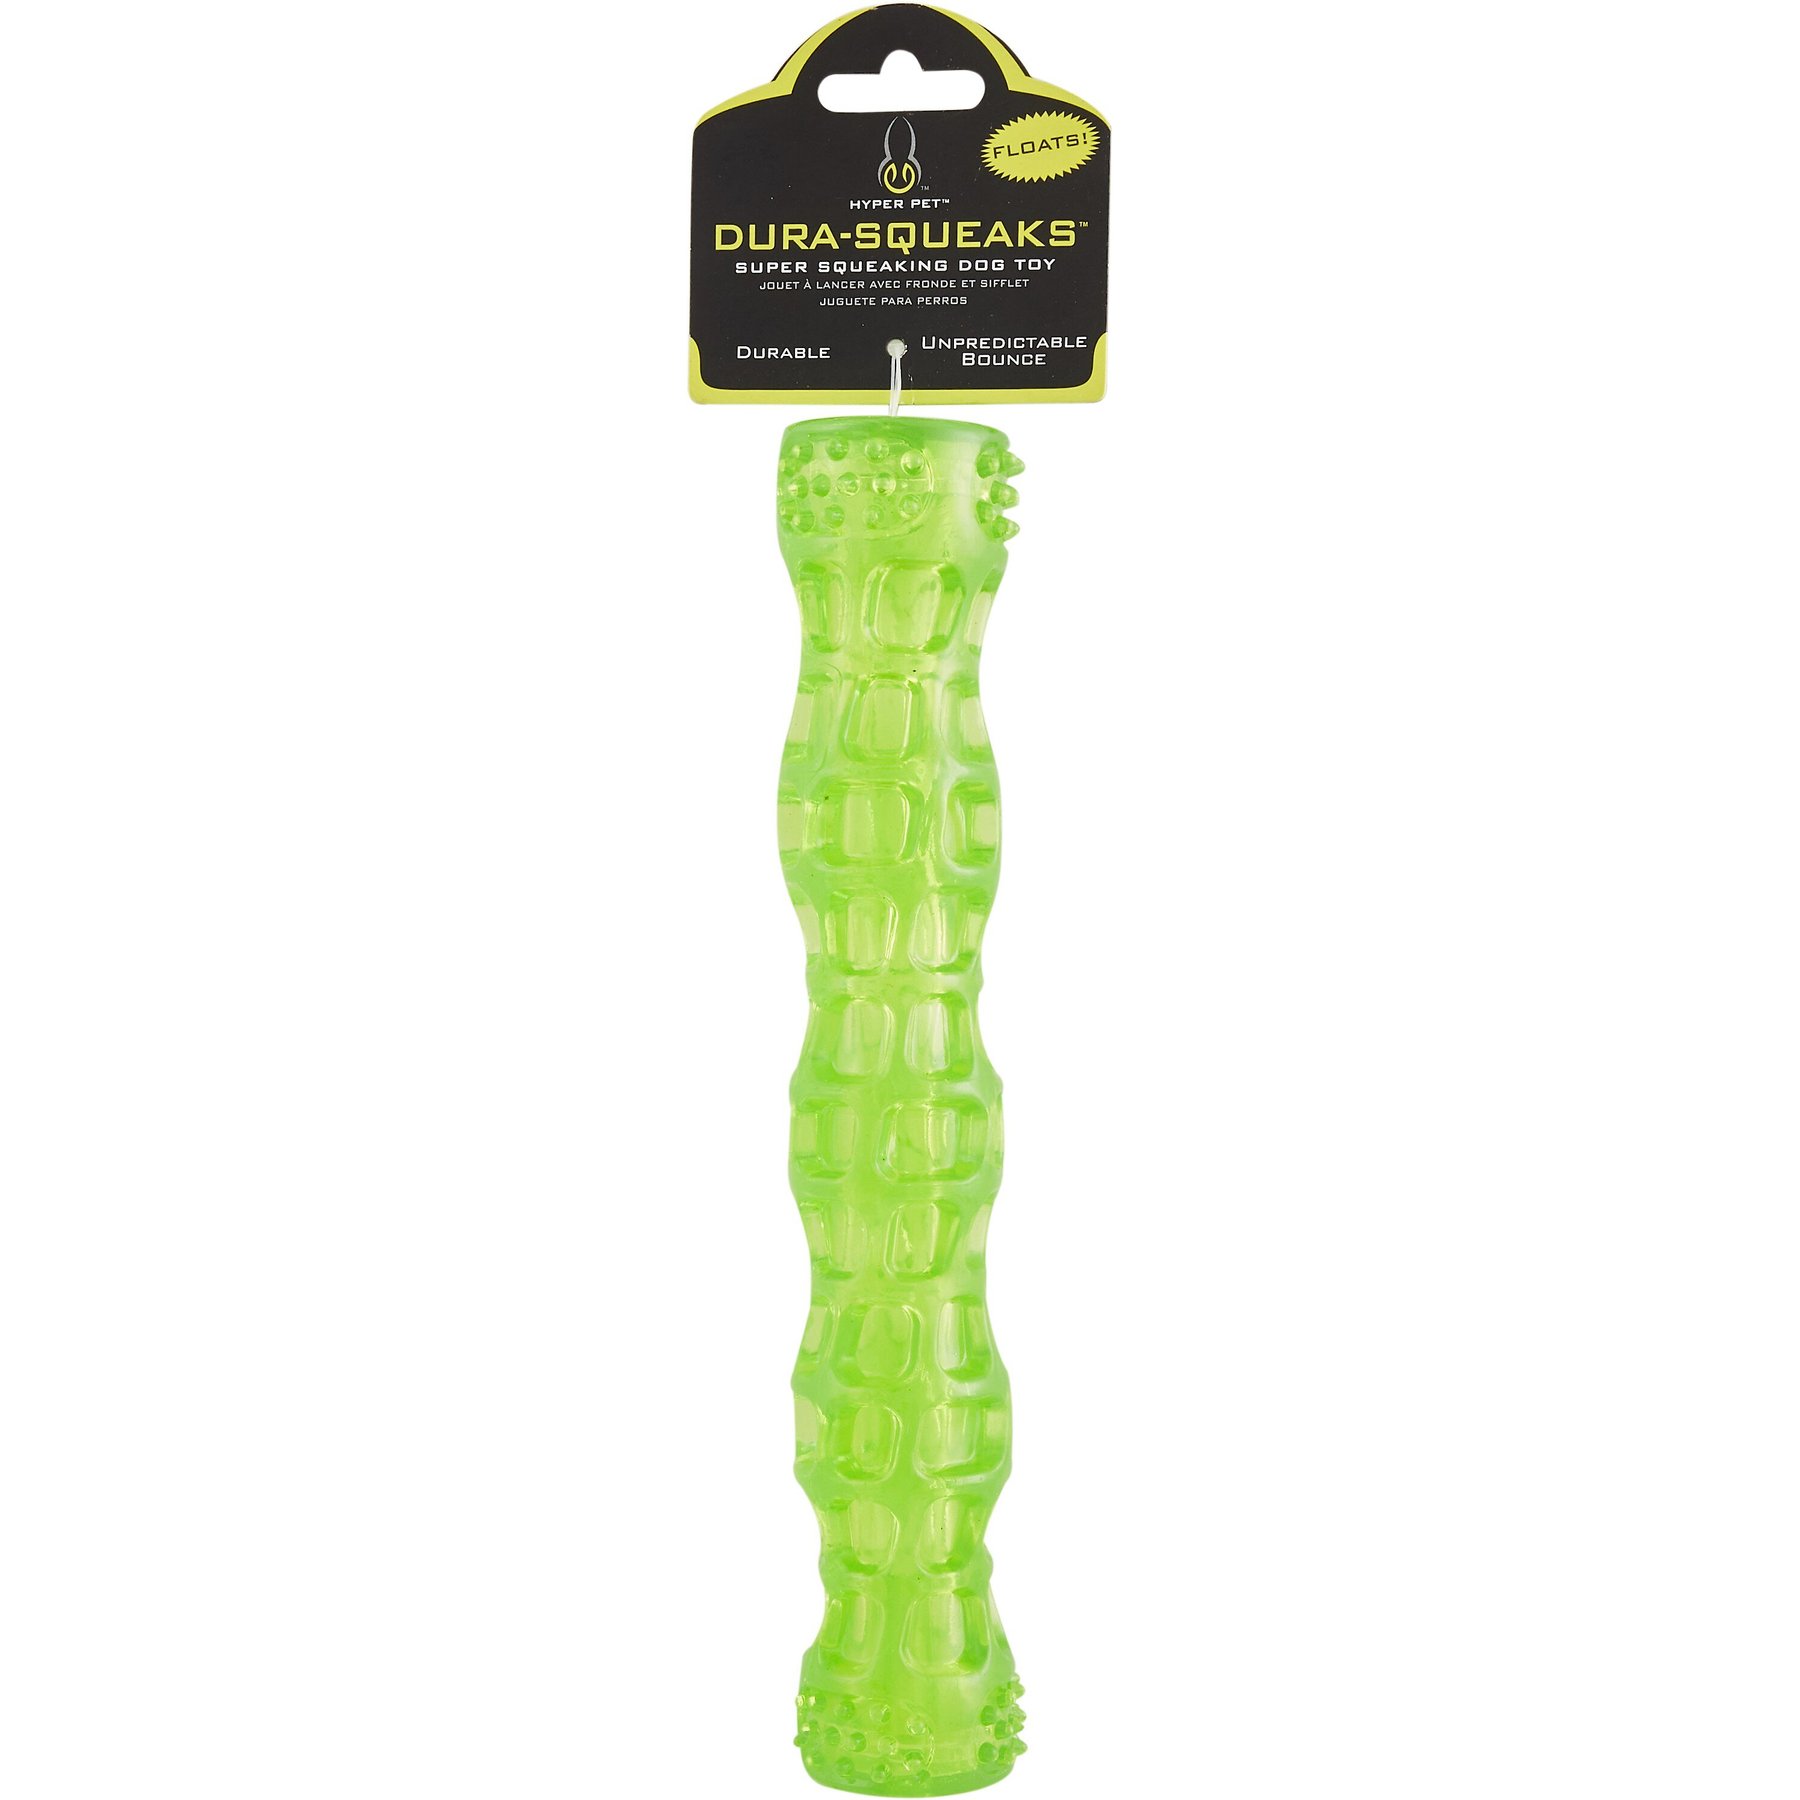 Hyper Pet Fetching Dog Toys - Throwing Stick Dog Toy Made With EVA Foam -  Easy To Clean & Floats On Water